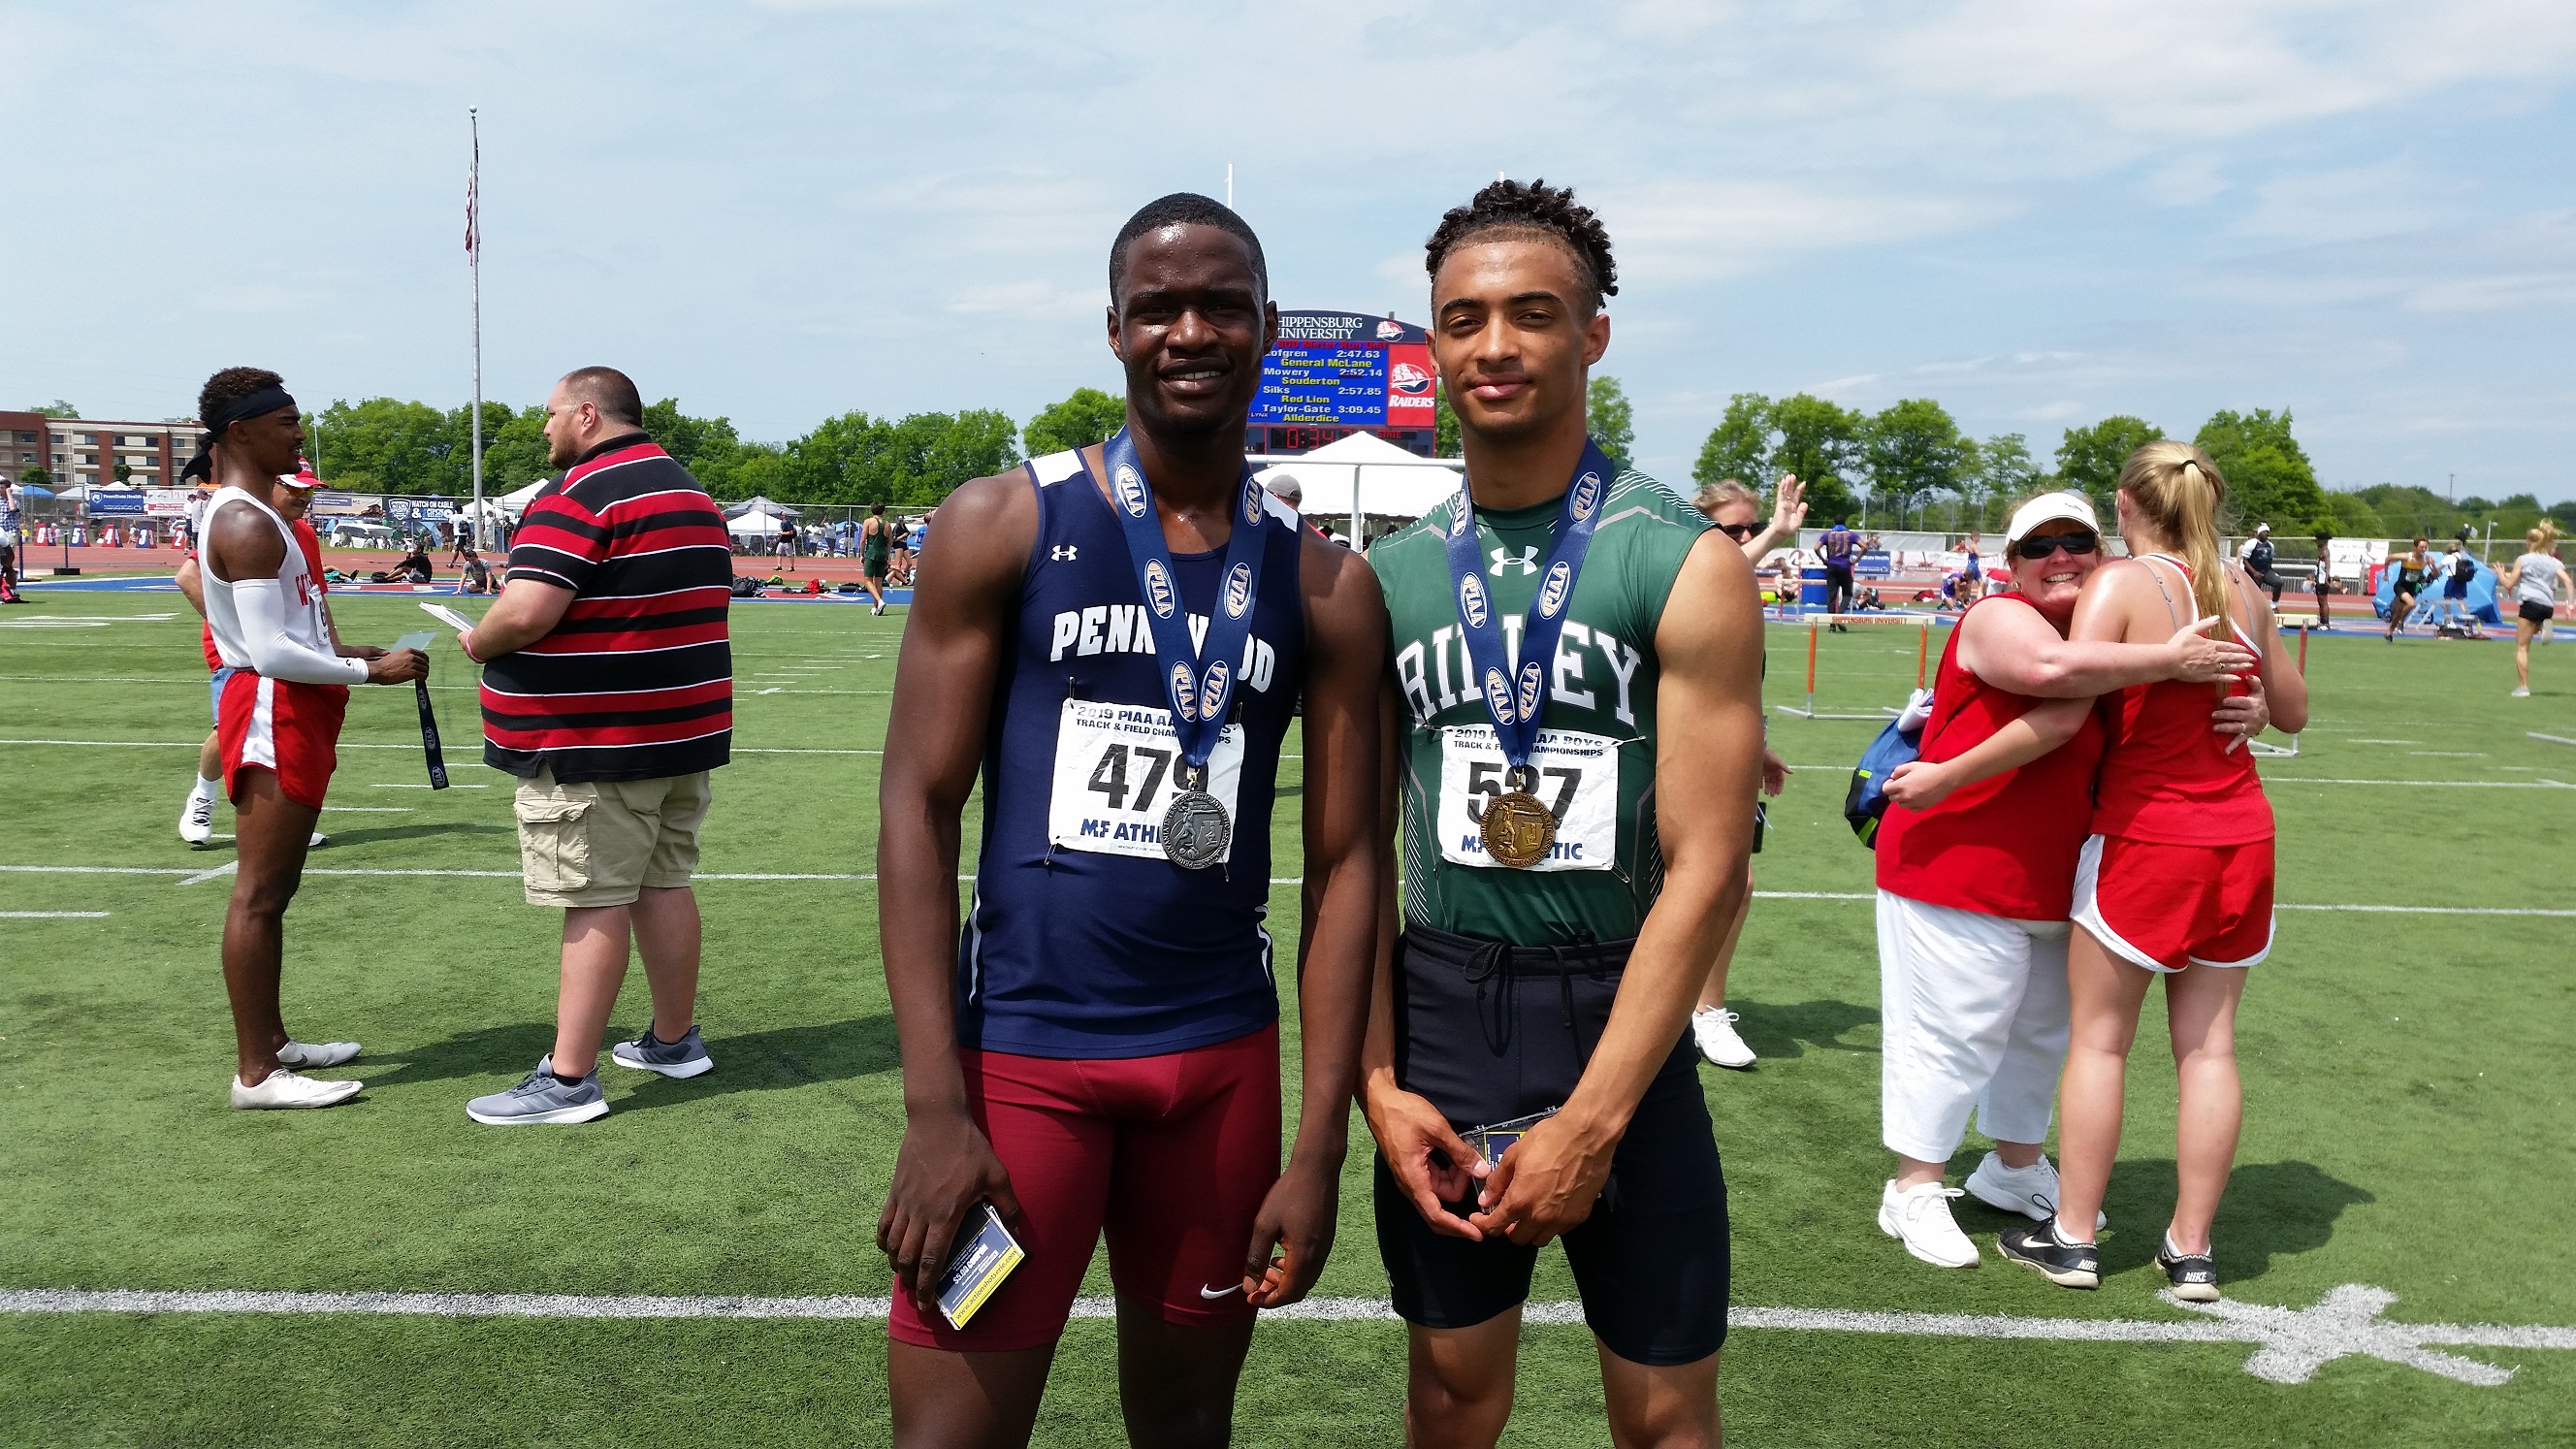 PIAA Track & Field Unhappy with silver, Odunjo leaves states savvier